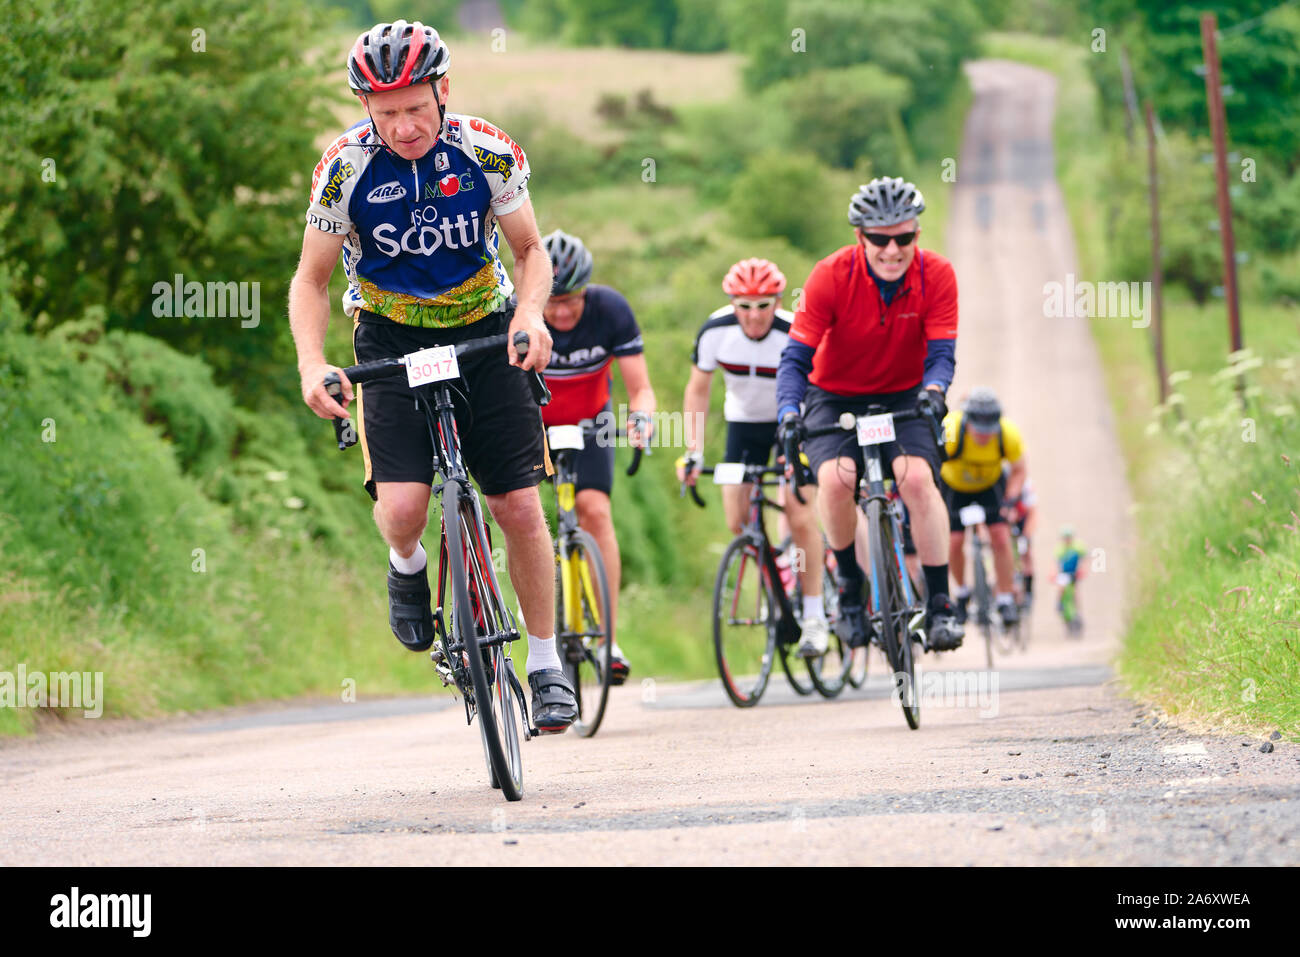 ROTHBURY, NEWCASTLE UPON TYNE, ENGLAND, UK - JULY 06, 2019: Cyclists working hard peddling up a steep hill at the cyclone race event from Newcastle to Stock Photo